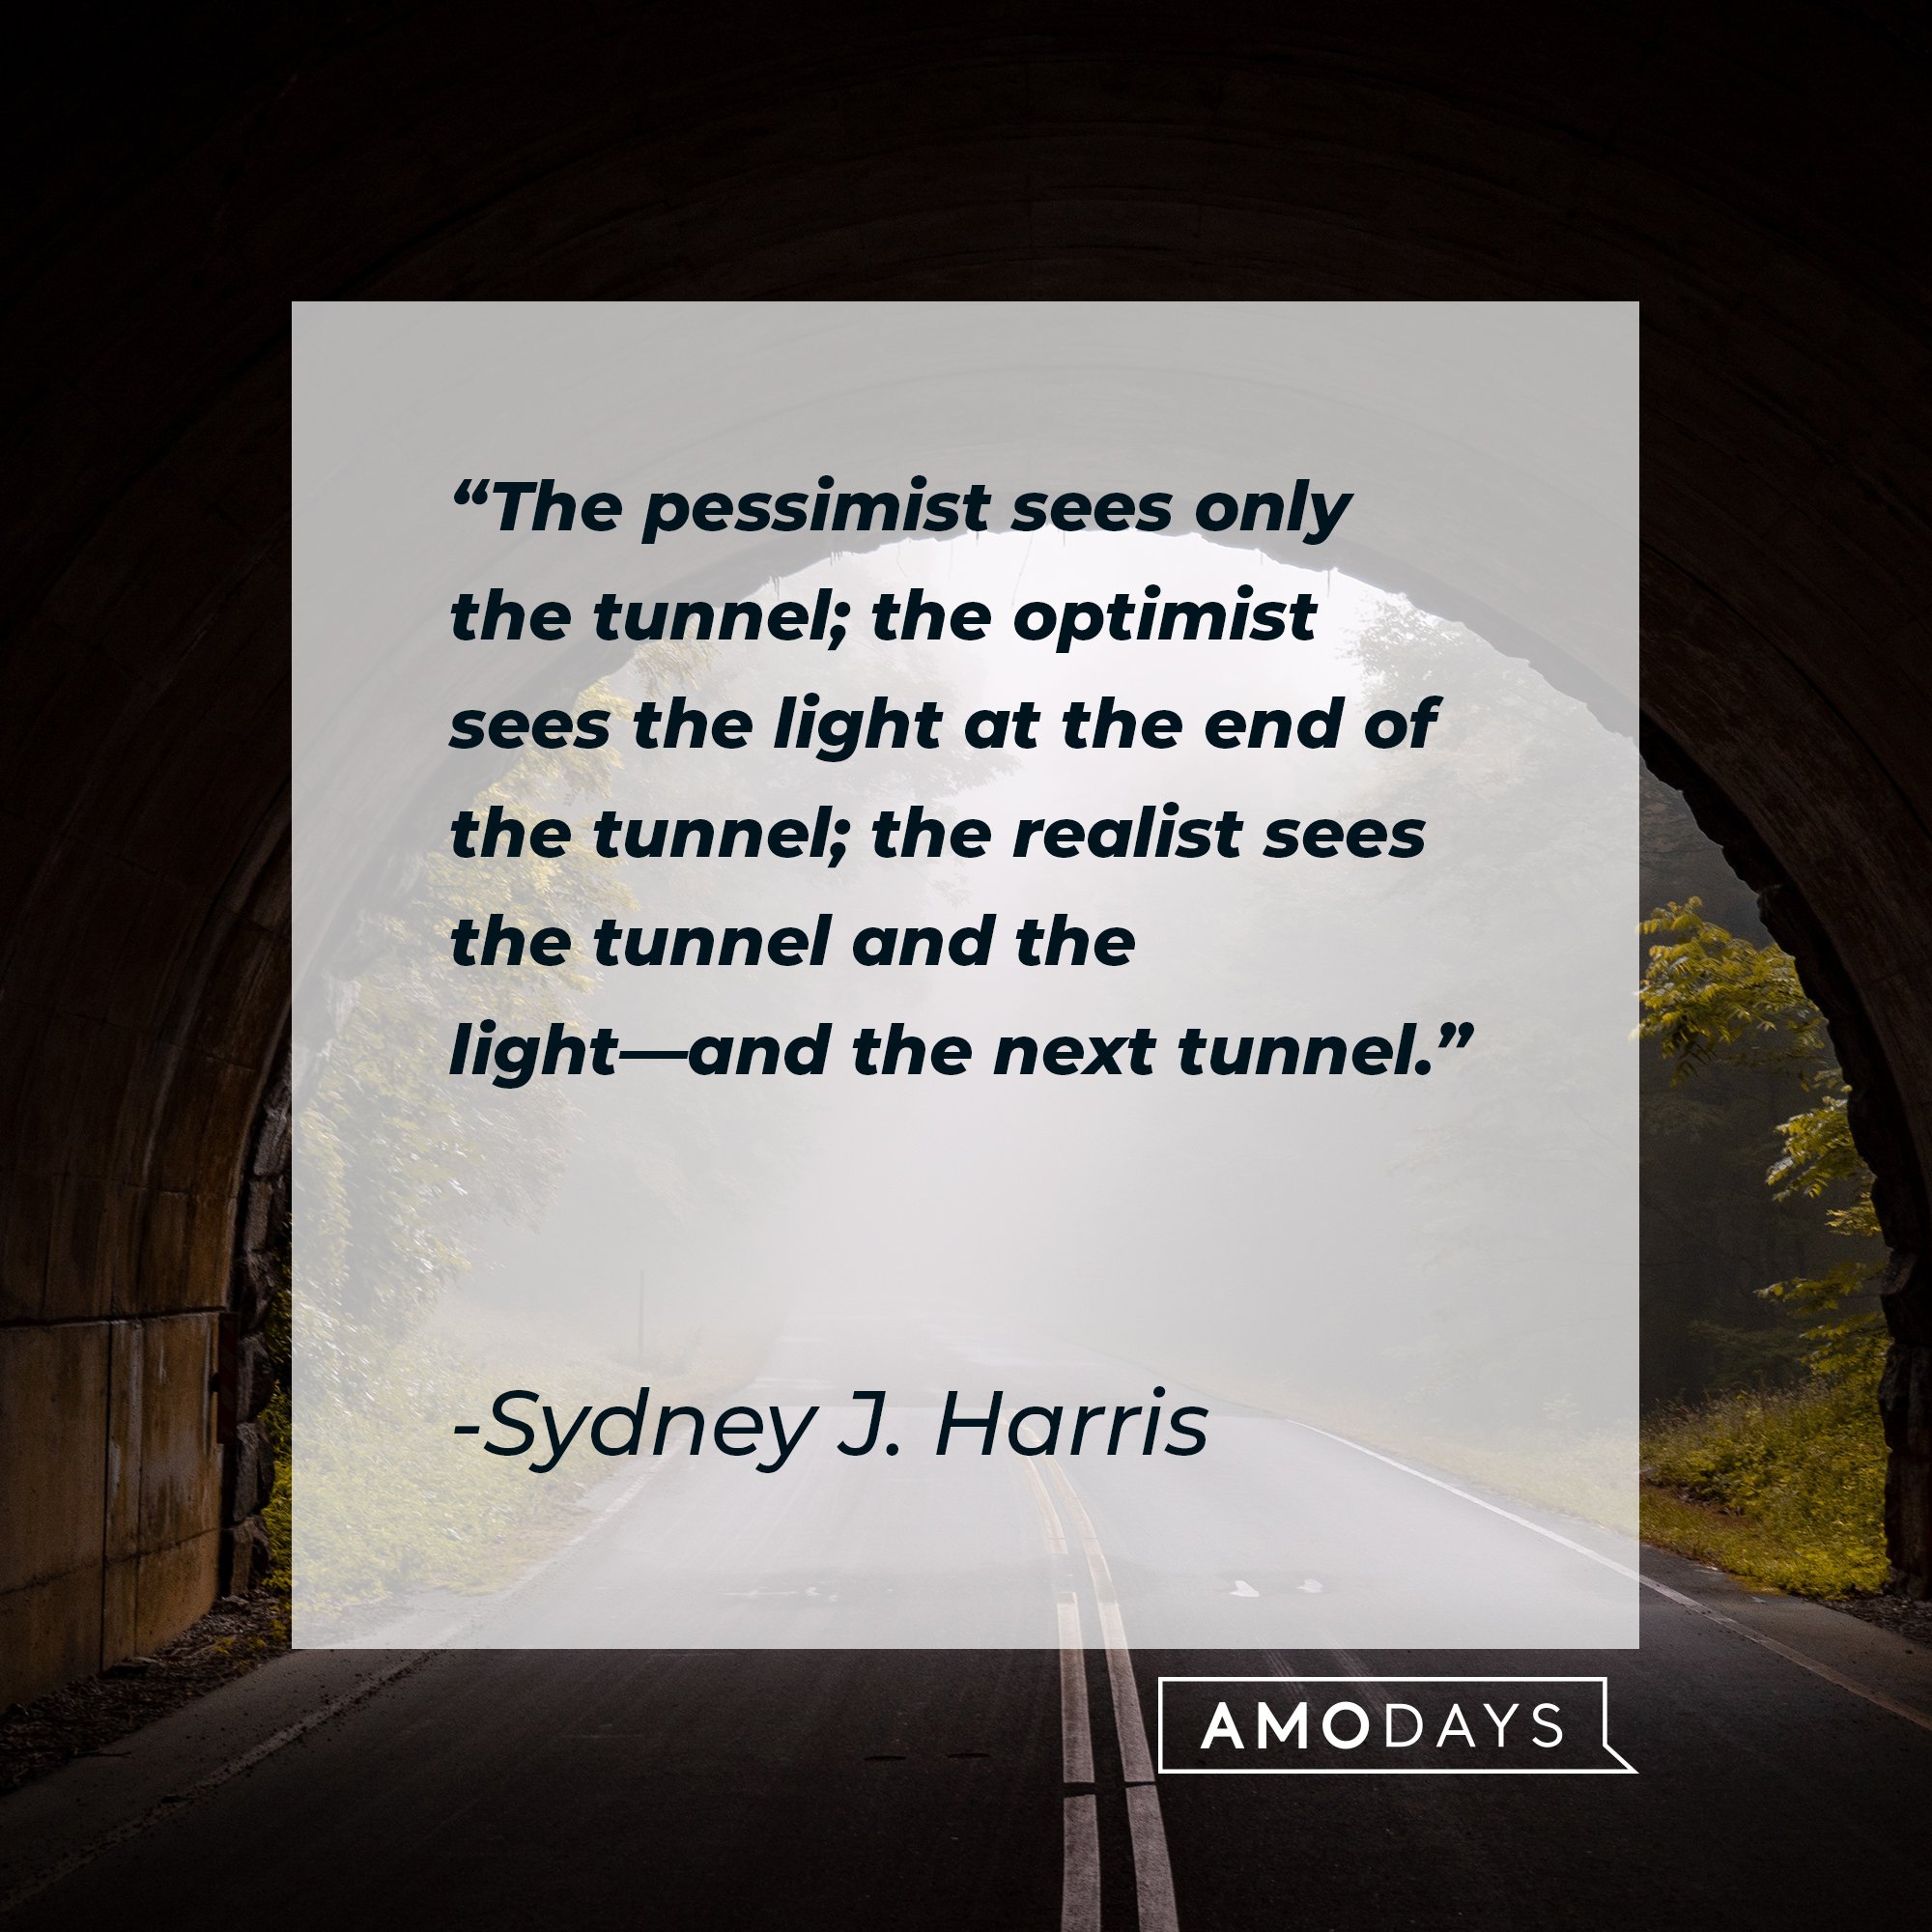 Sydney J. Harris’s quote: "The pessimist sees only the tunnel; the optimist sees the light at the end of the tunnel; the realist sees the tunnel and the light—and the next tunnel." |  Image: AmoDays